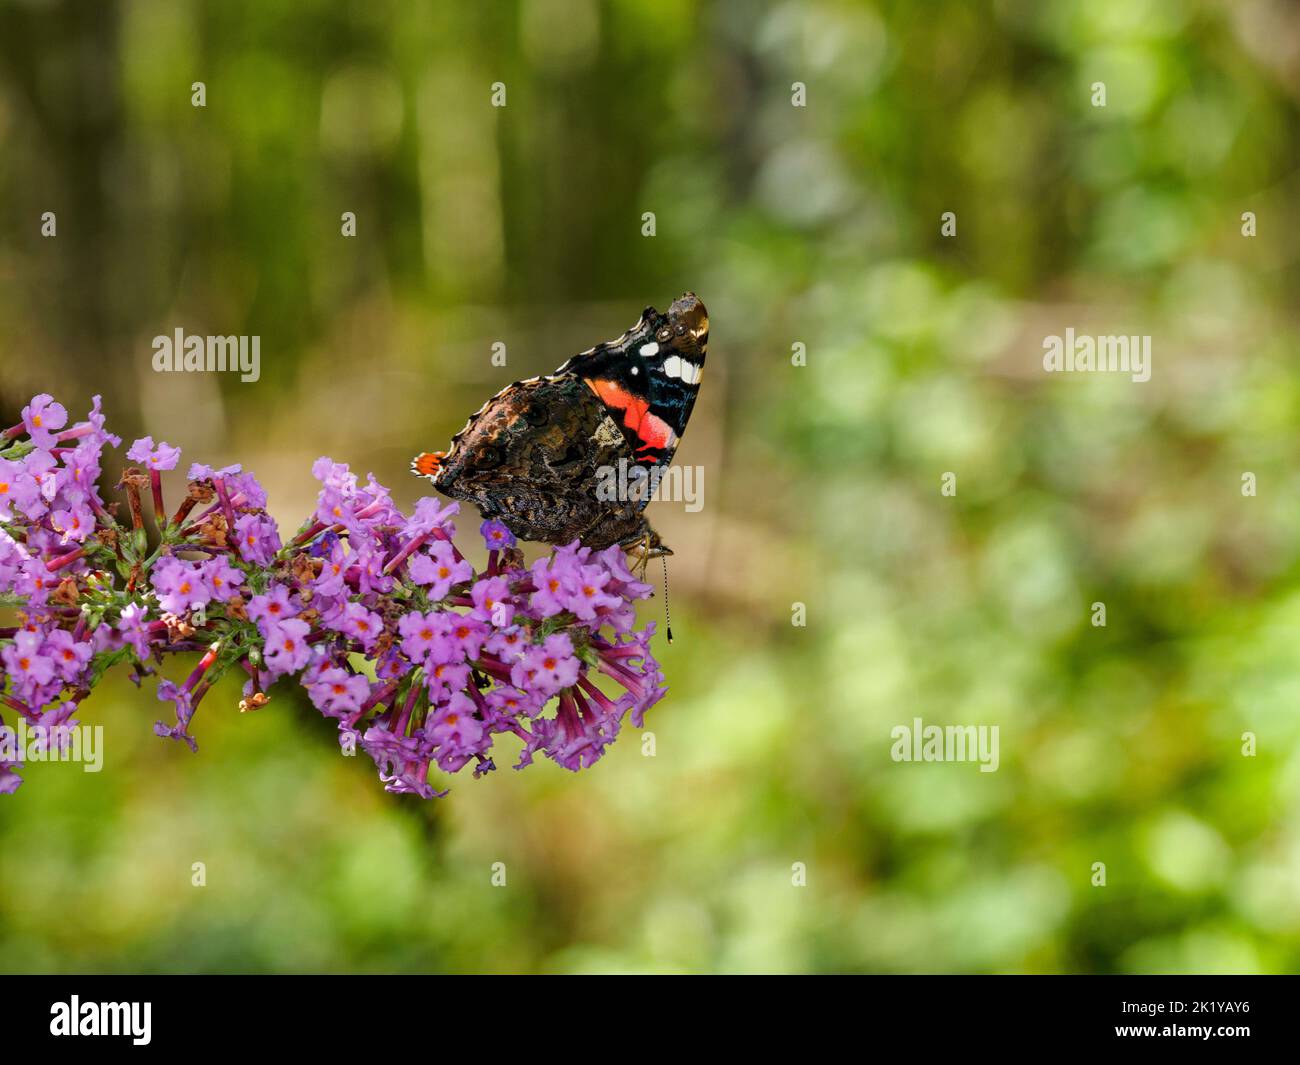 Close up macro image of a Red Admiral butterfly (Vanessa atalanta) feeding on nectar from a pink buddleia flower (Buddleja davidii) Stock Photo